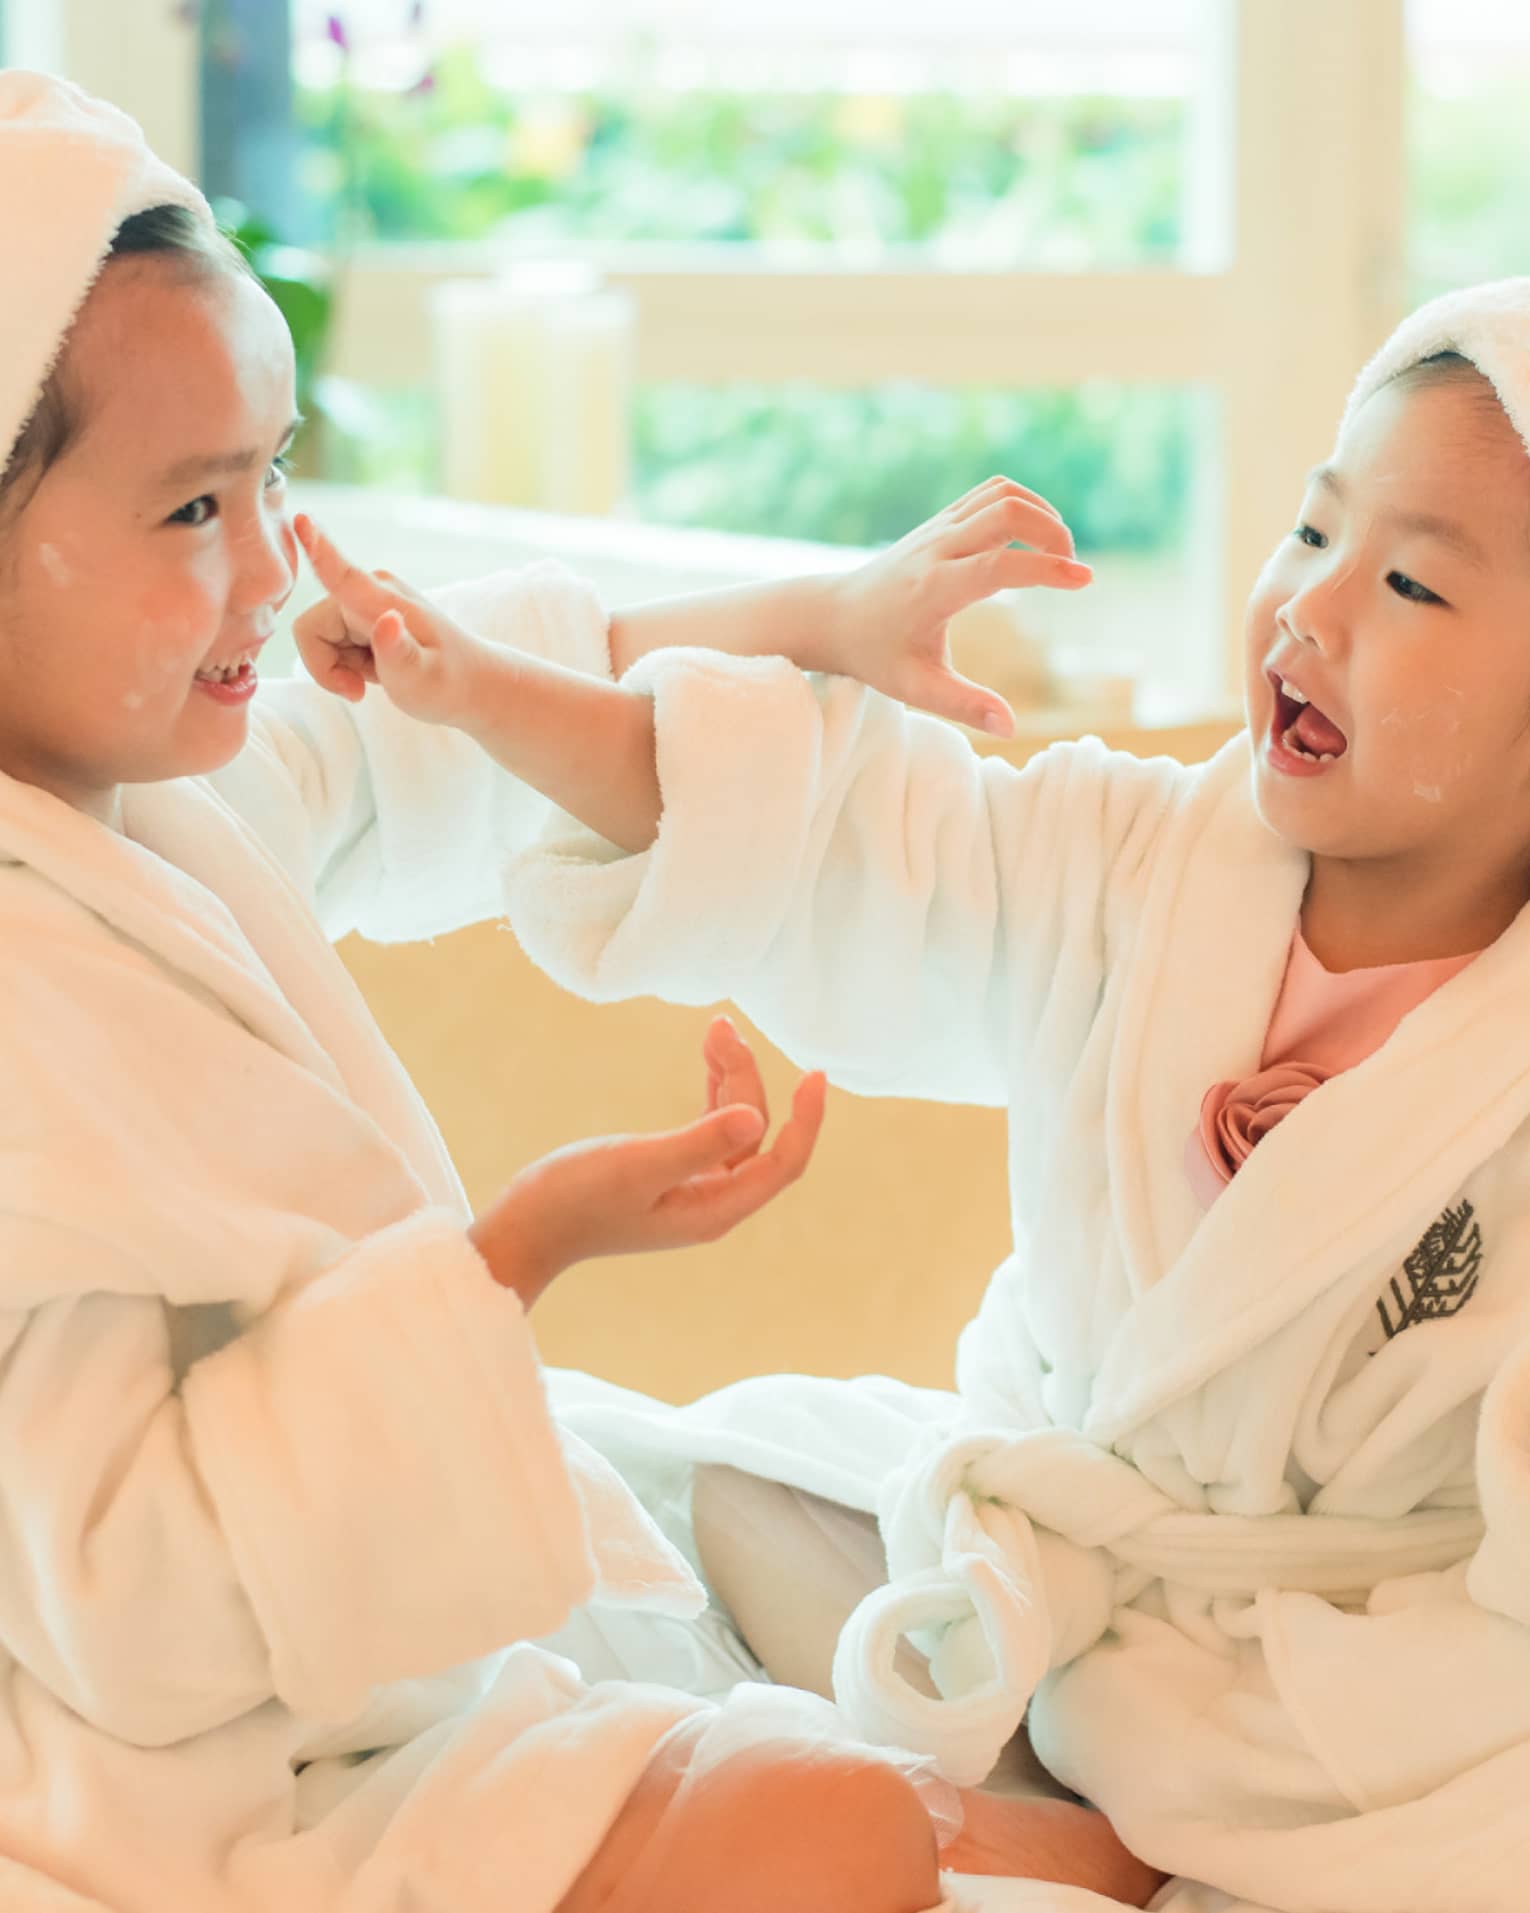 Two laughing young children in white bathrobes with towels around hair put lotion on each other's faces 